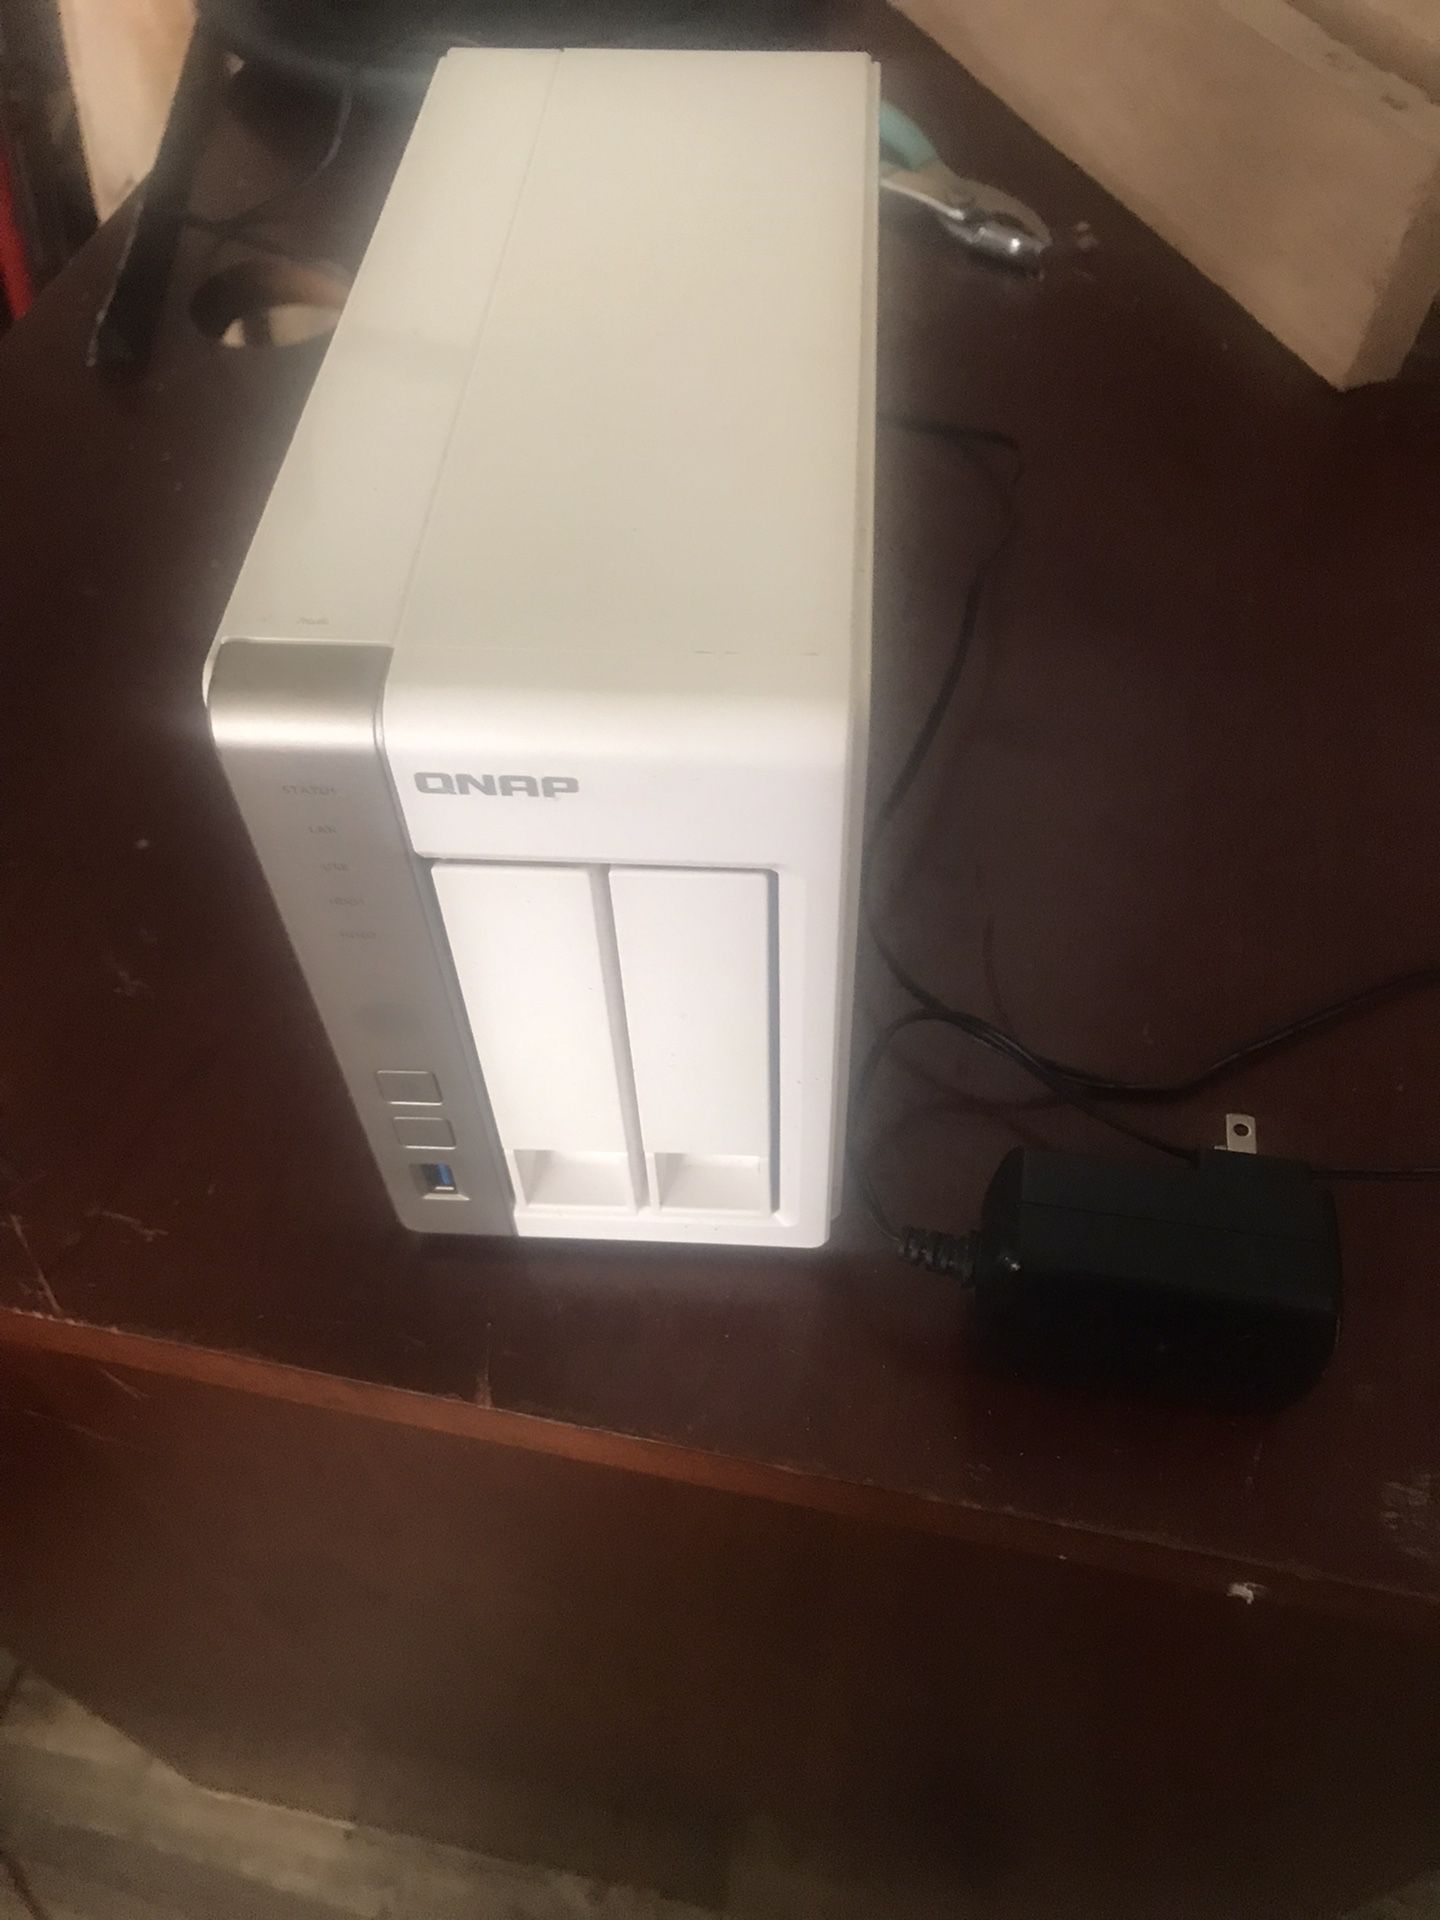 Qnap TS-251 NAS With Power Supply